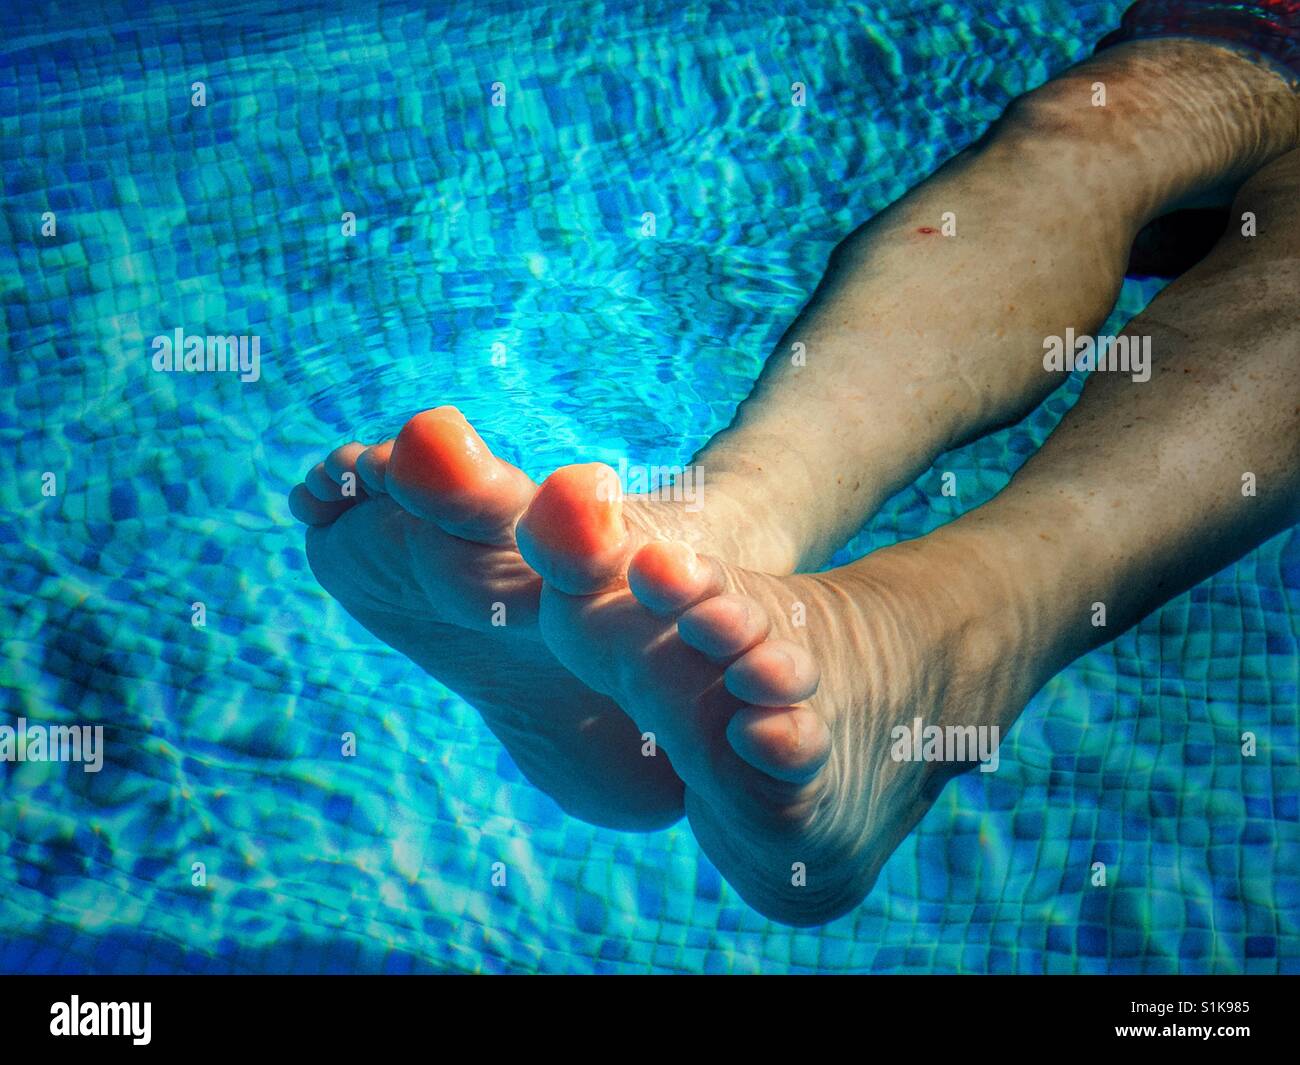 Woman floating in swimming pool, focus on legs and feet Stock Photo